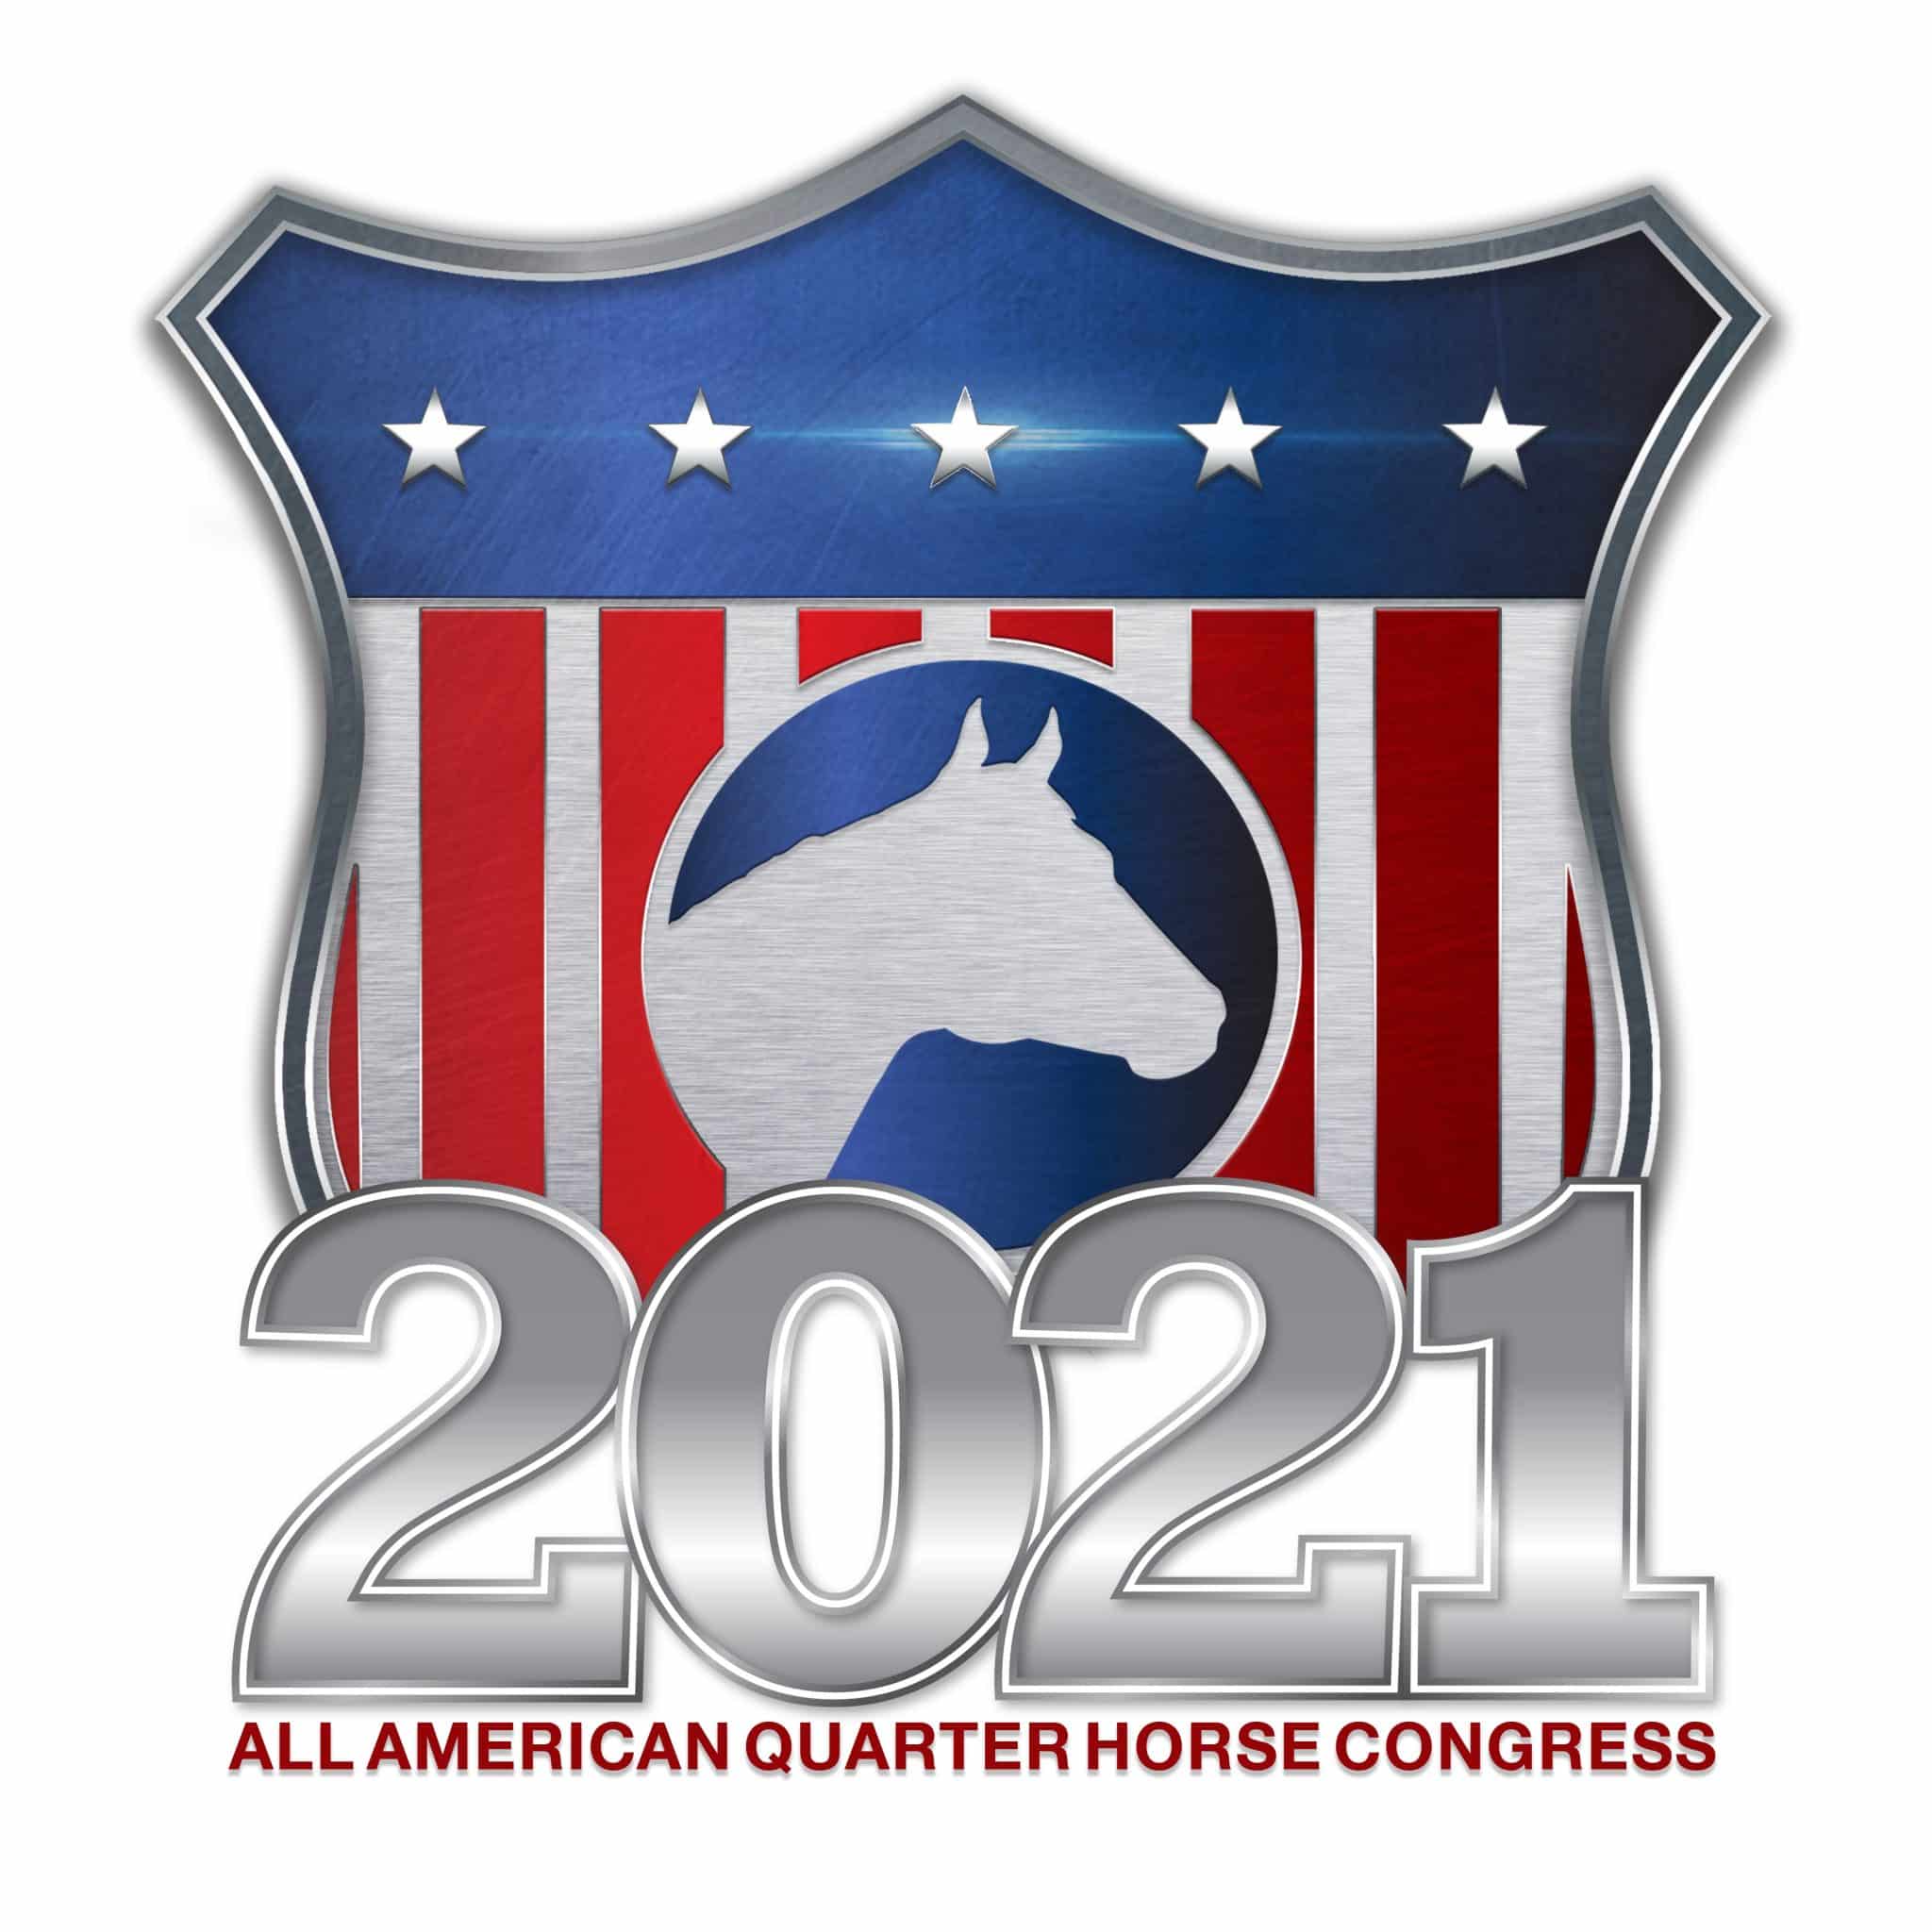 All American Quarter Horse Congress Comes Onboard ThorSport Racing’s No